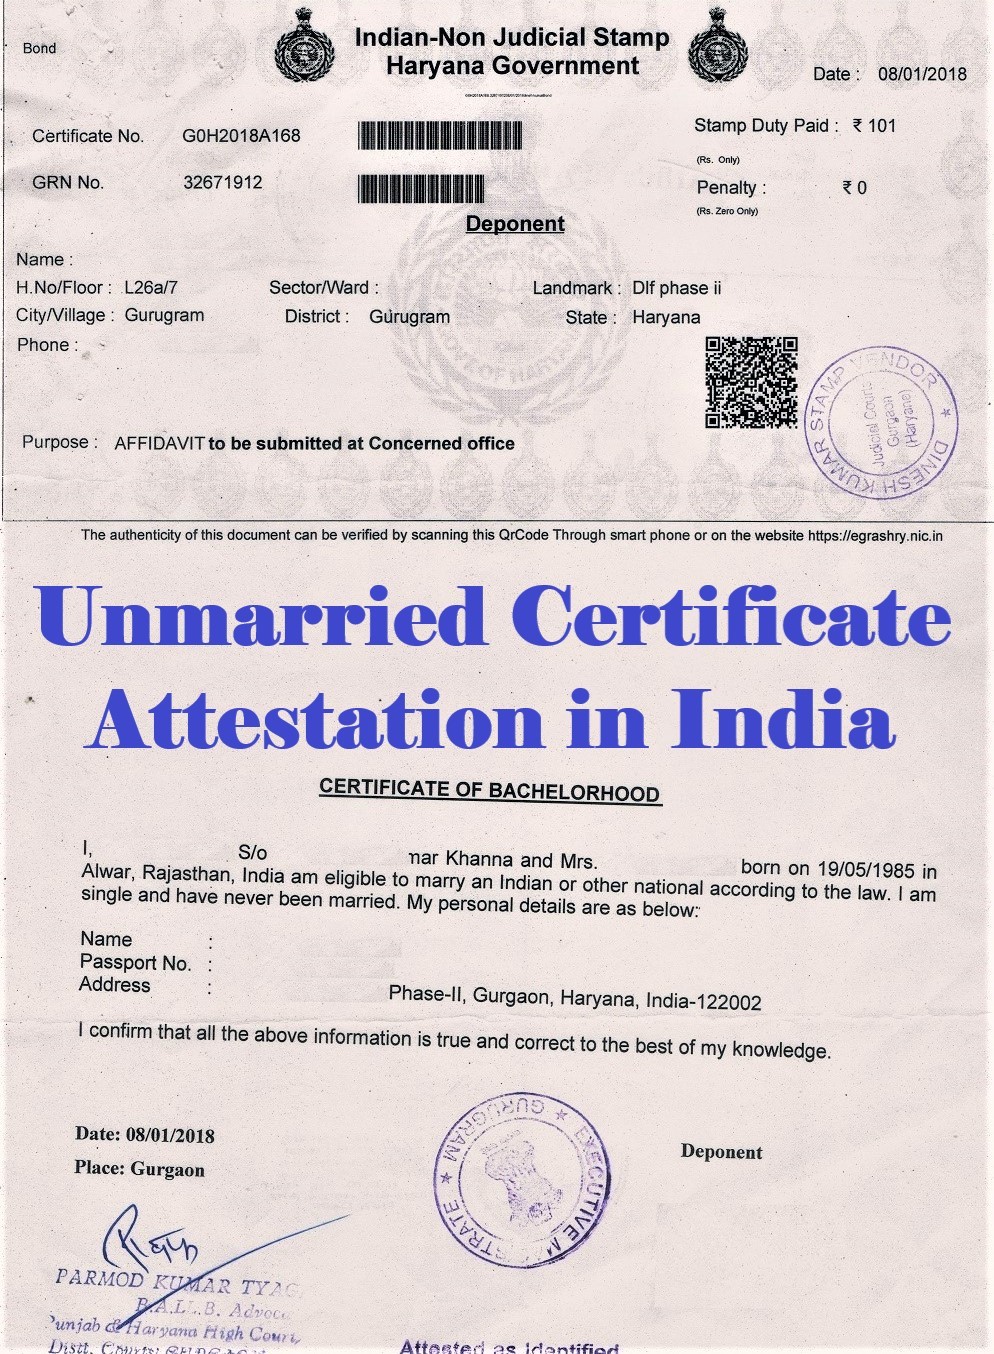 Unmarried Certificate Attestation from Dominica Embassy